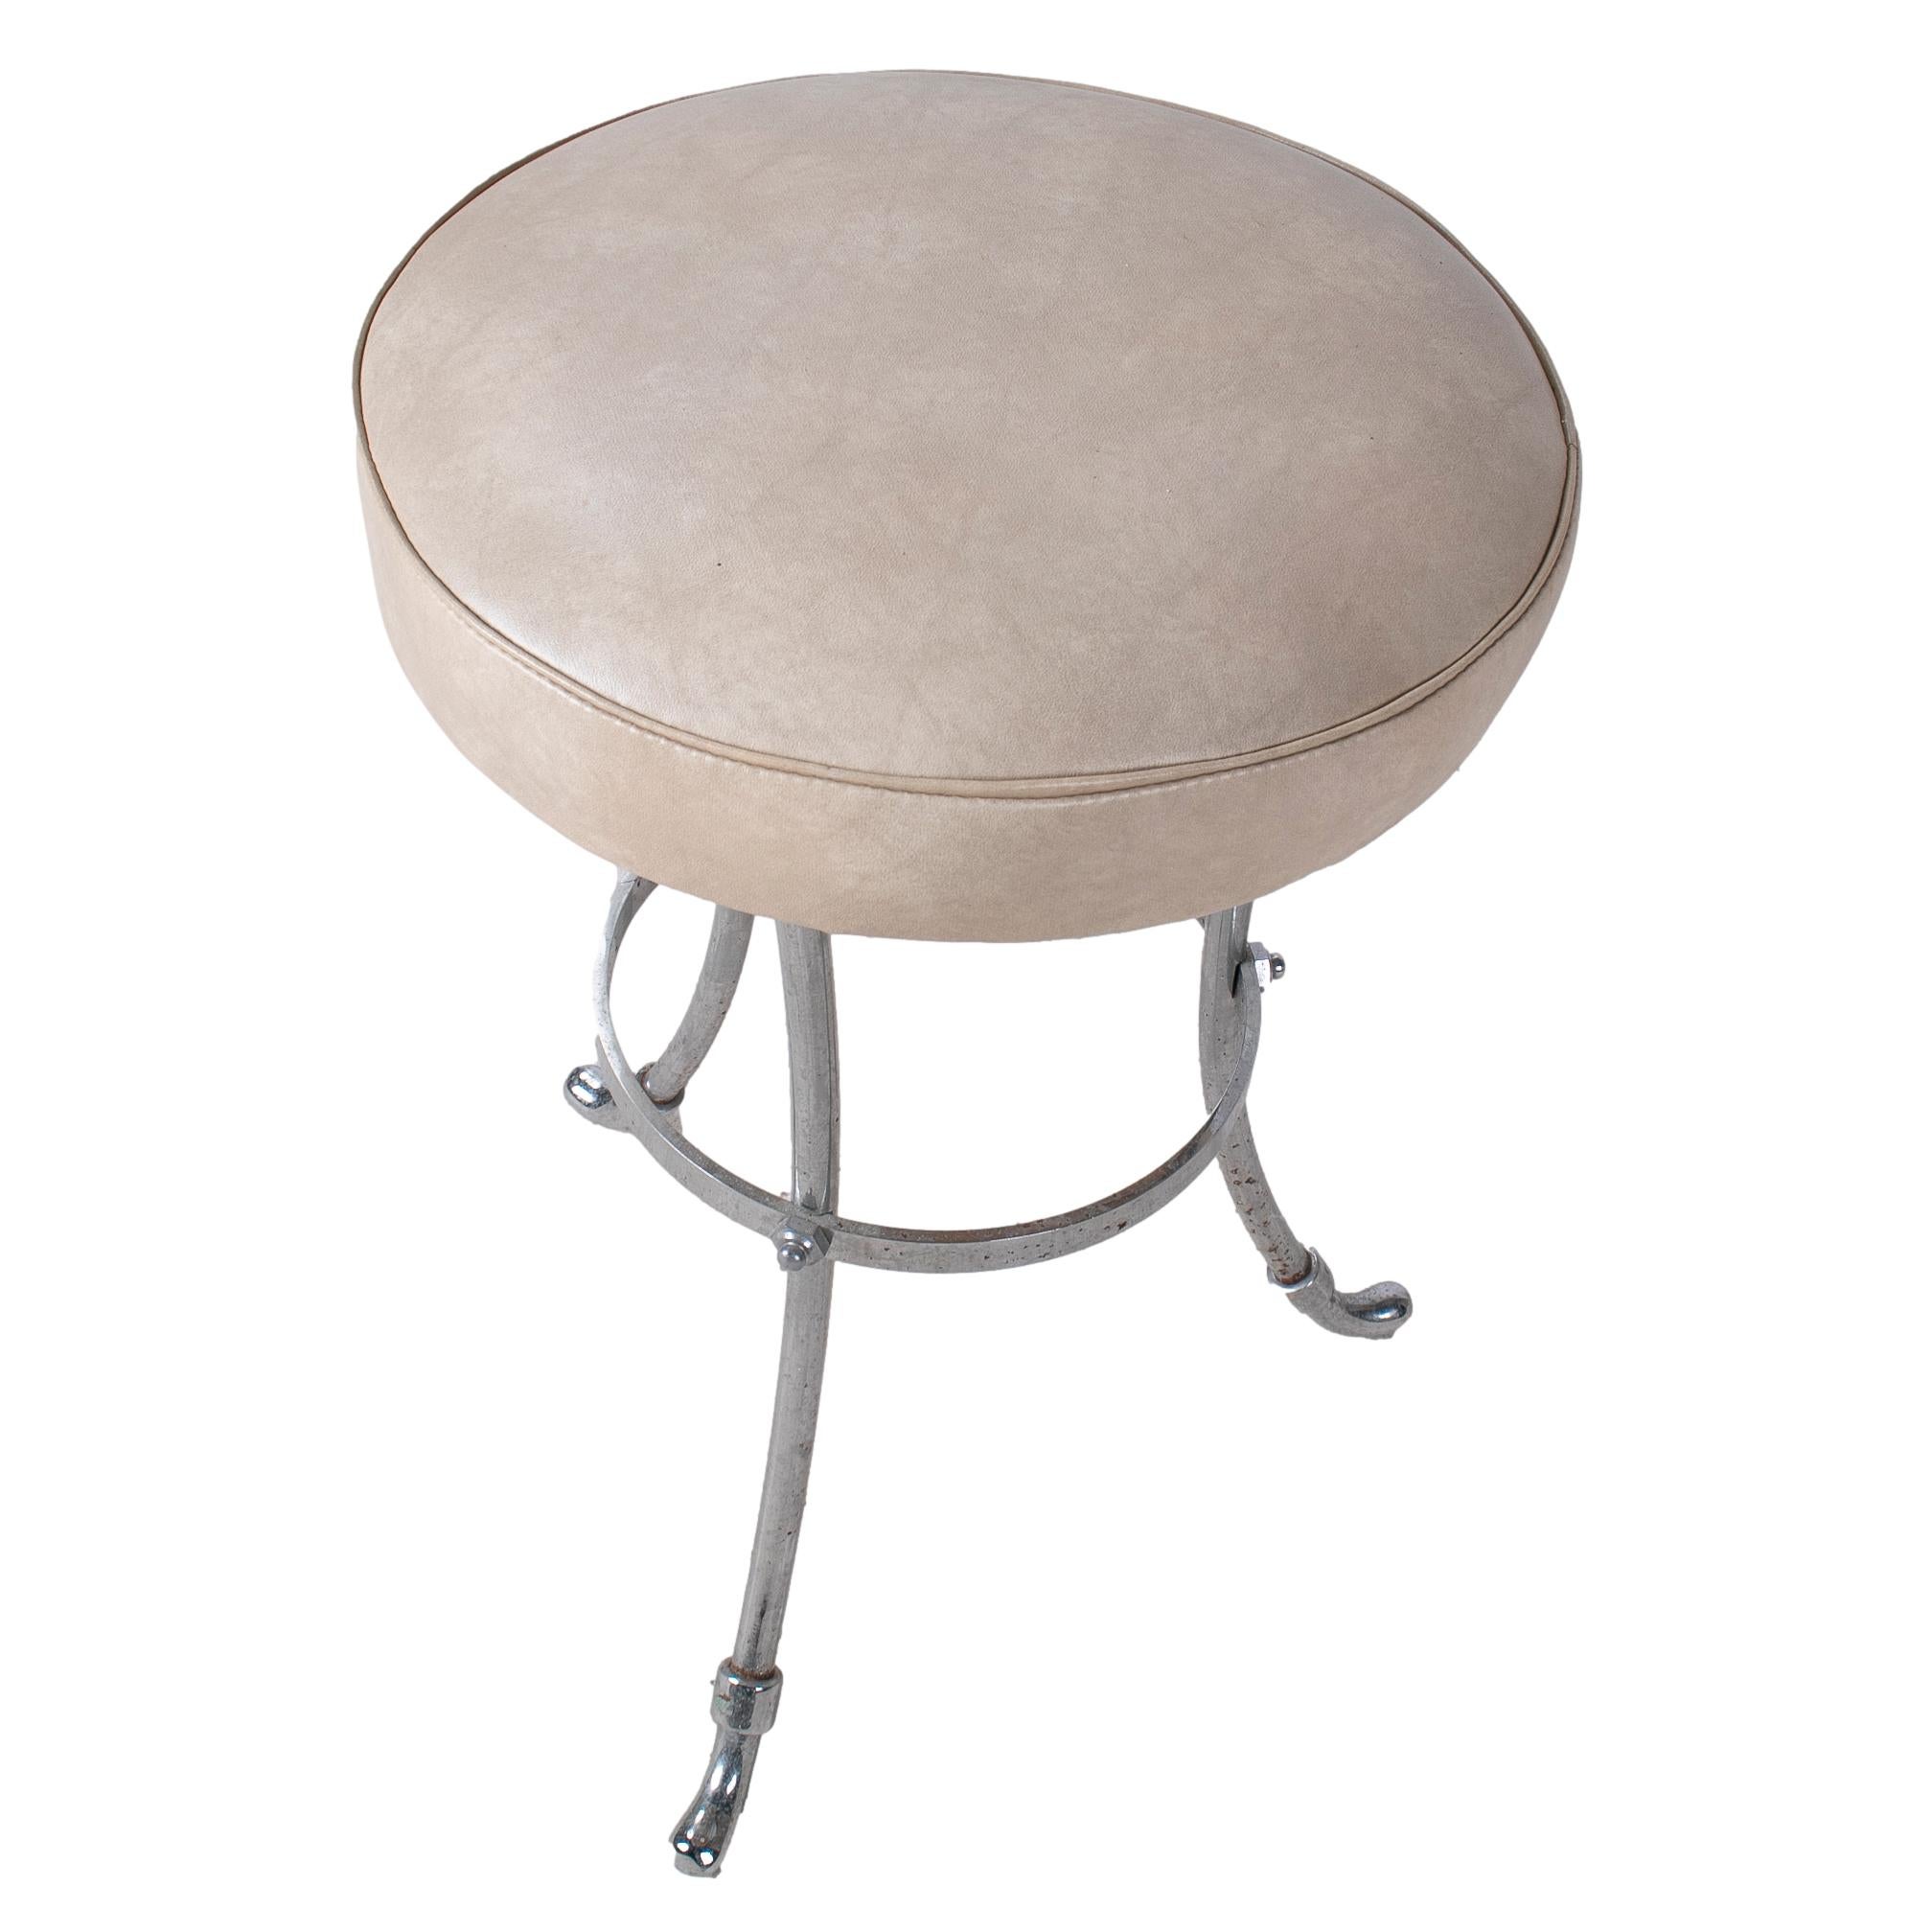 Mid-20th Century 1950s French Faux Leather Steel Stool